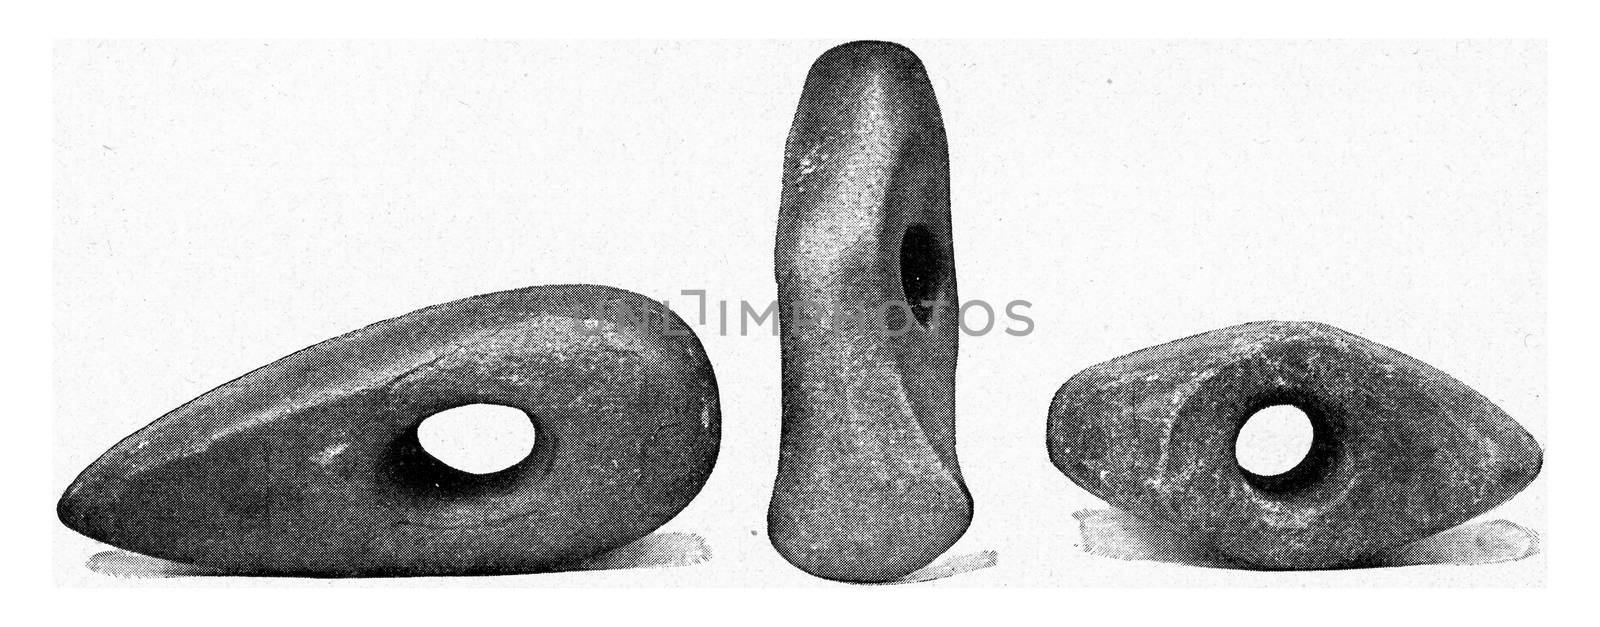 Flint axes of the recent stone age, vintage engraving. by Morphart